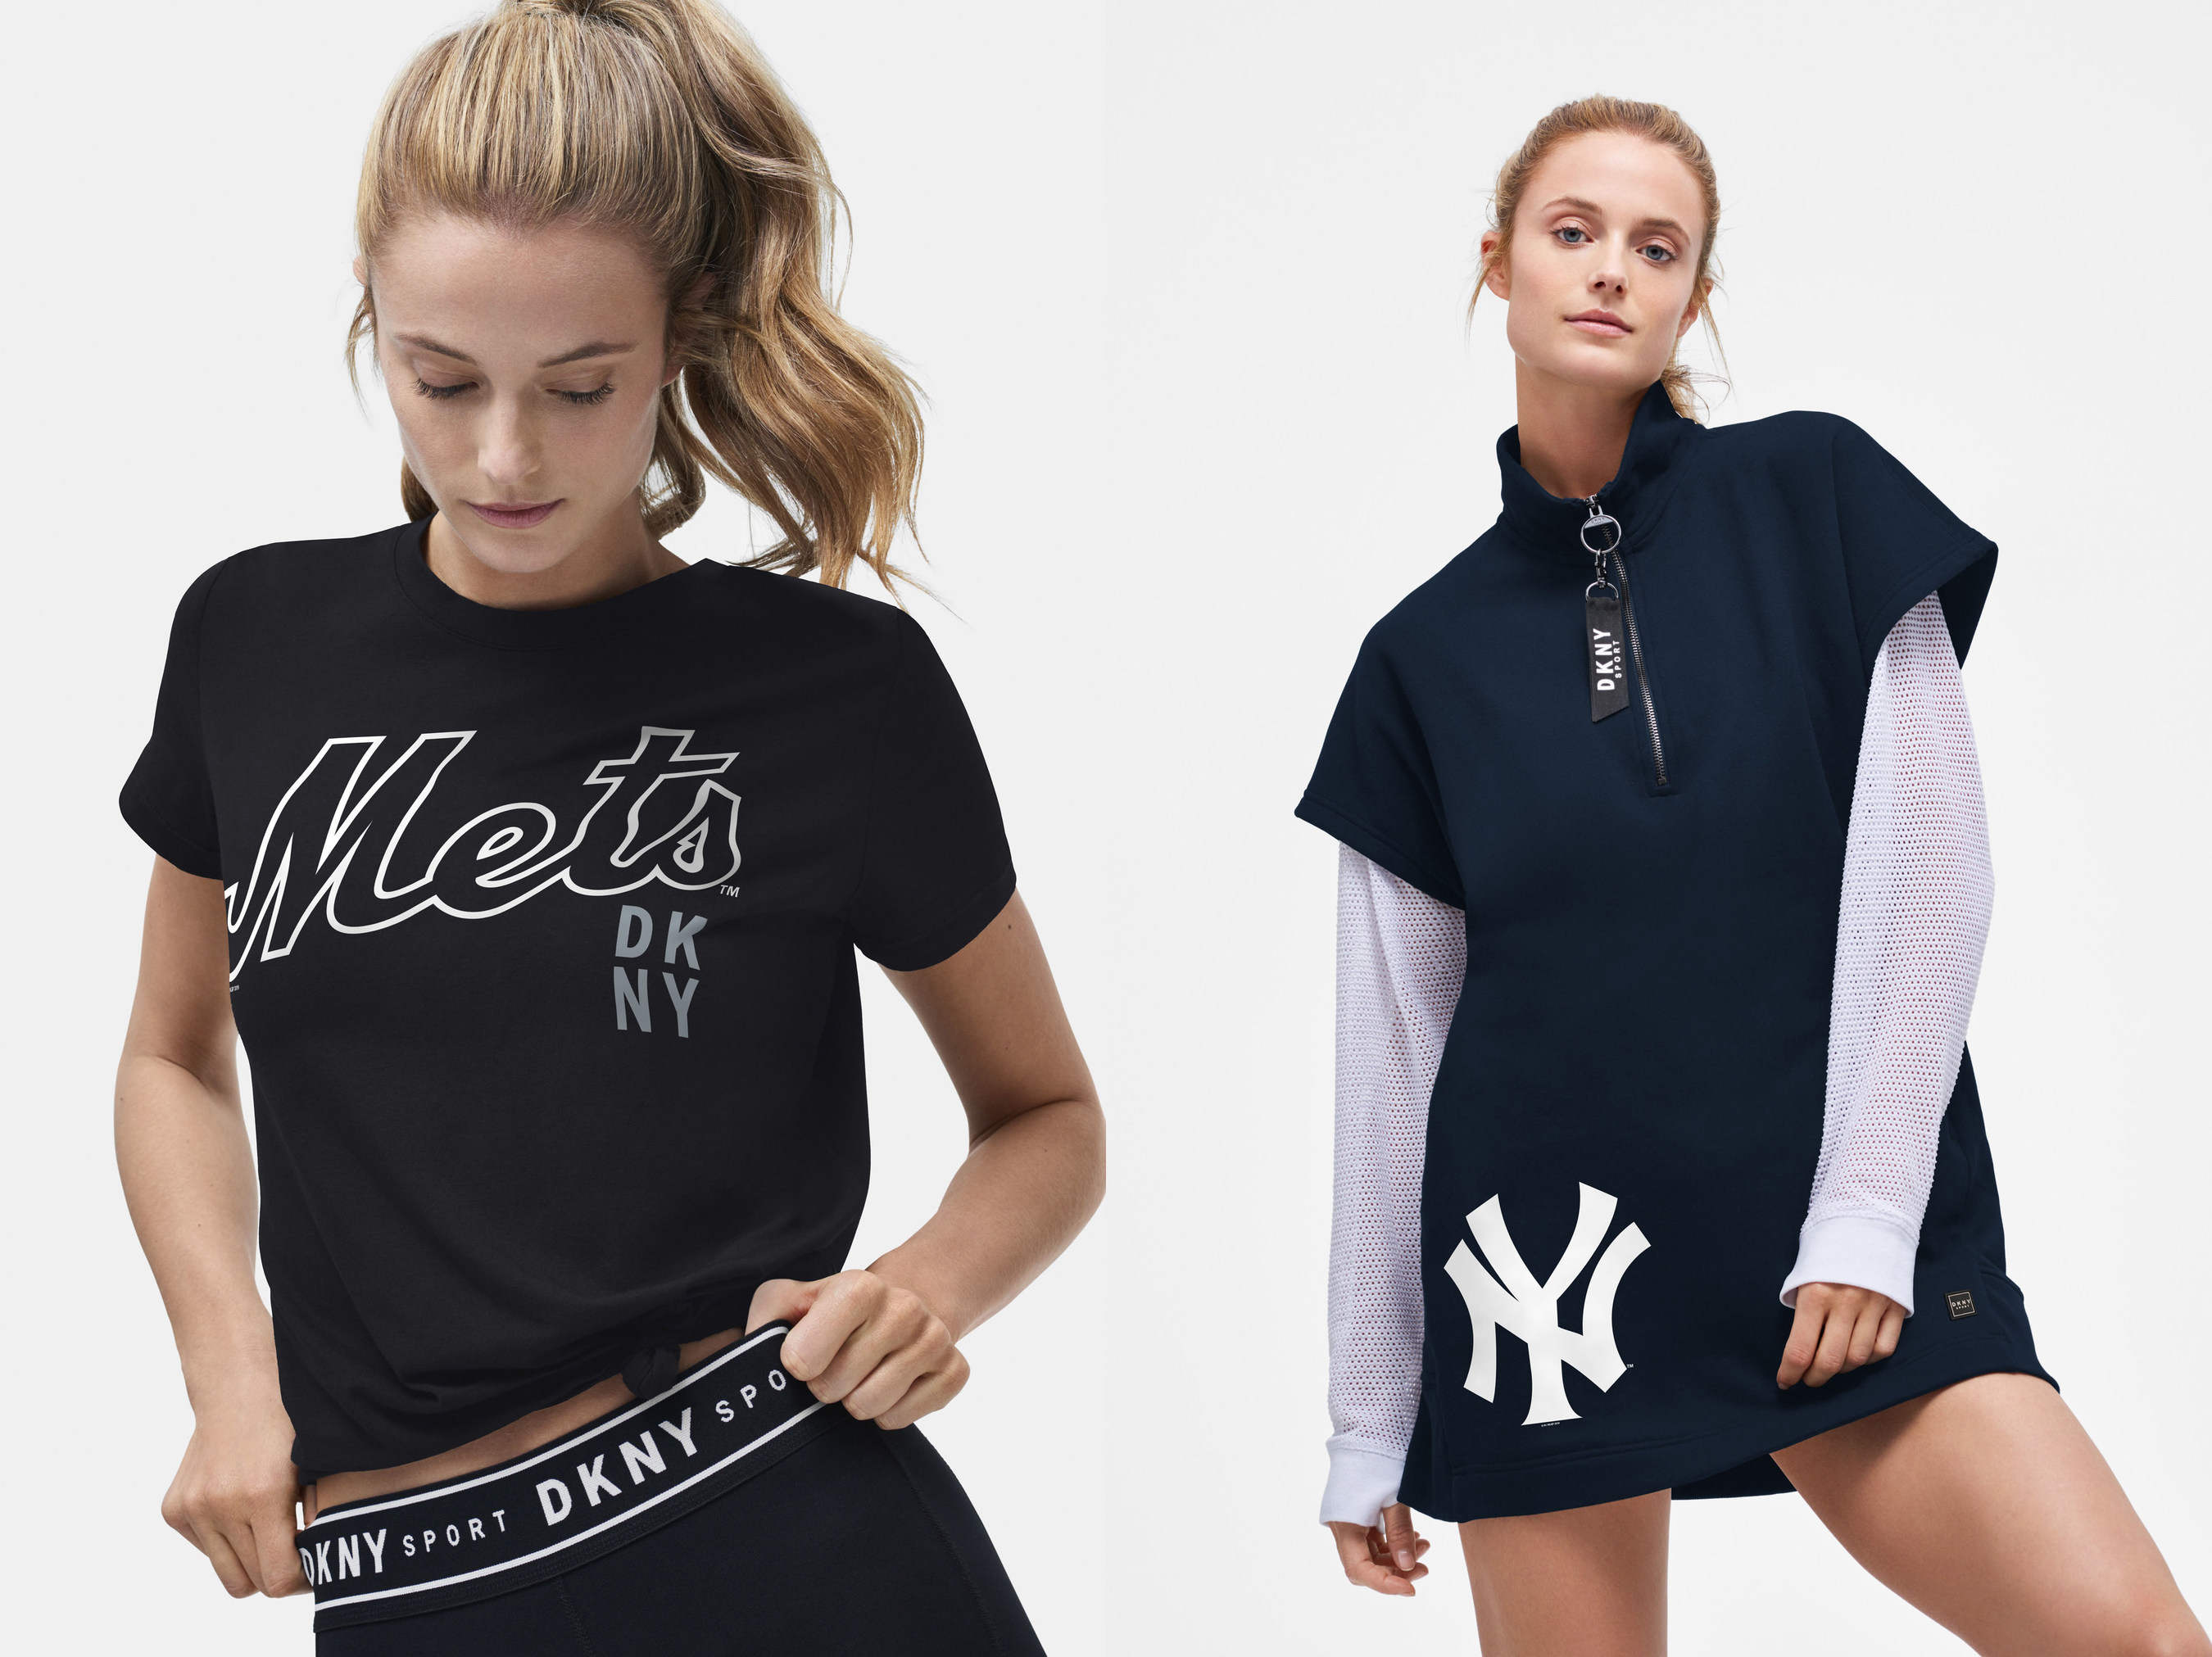 DKNY Launches MLB Sport Capsule